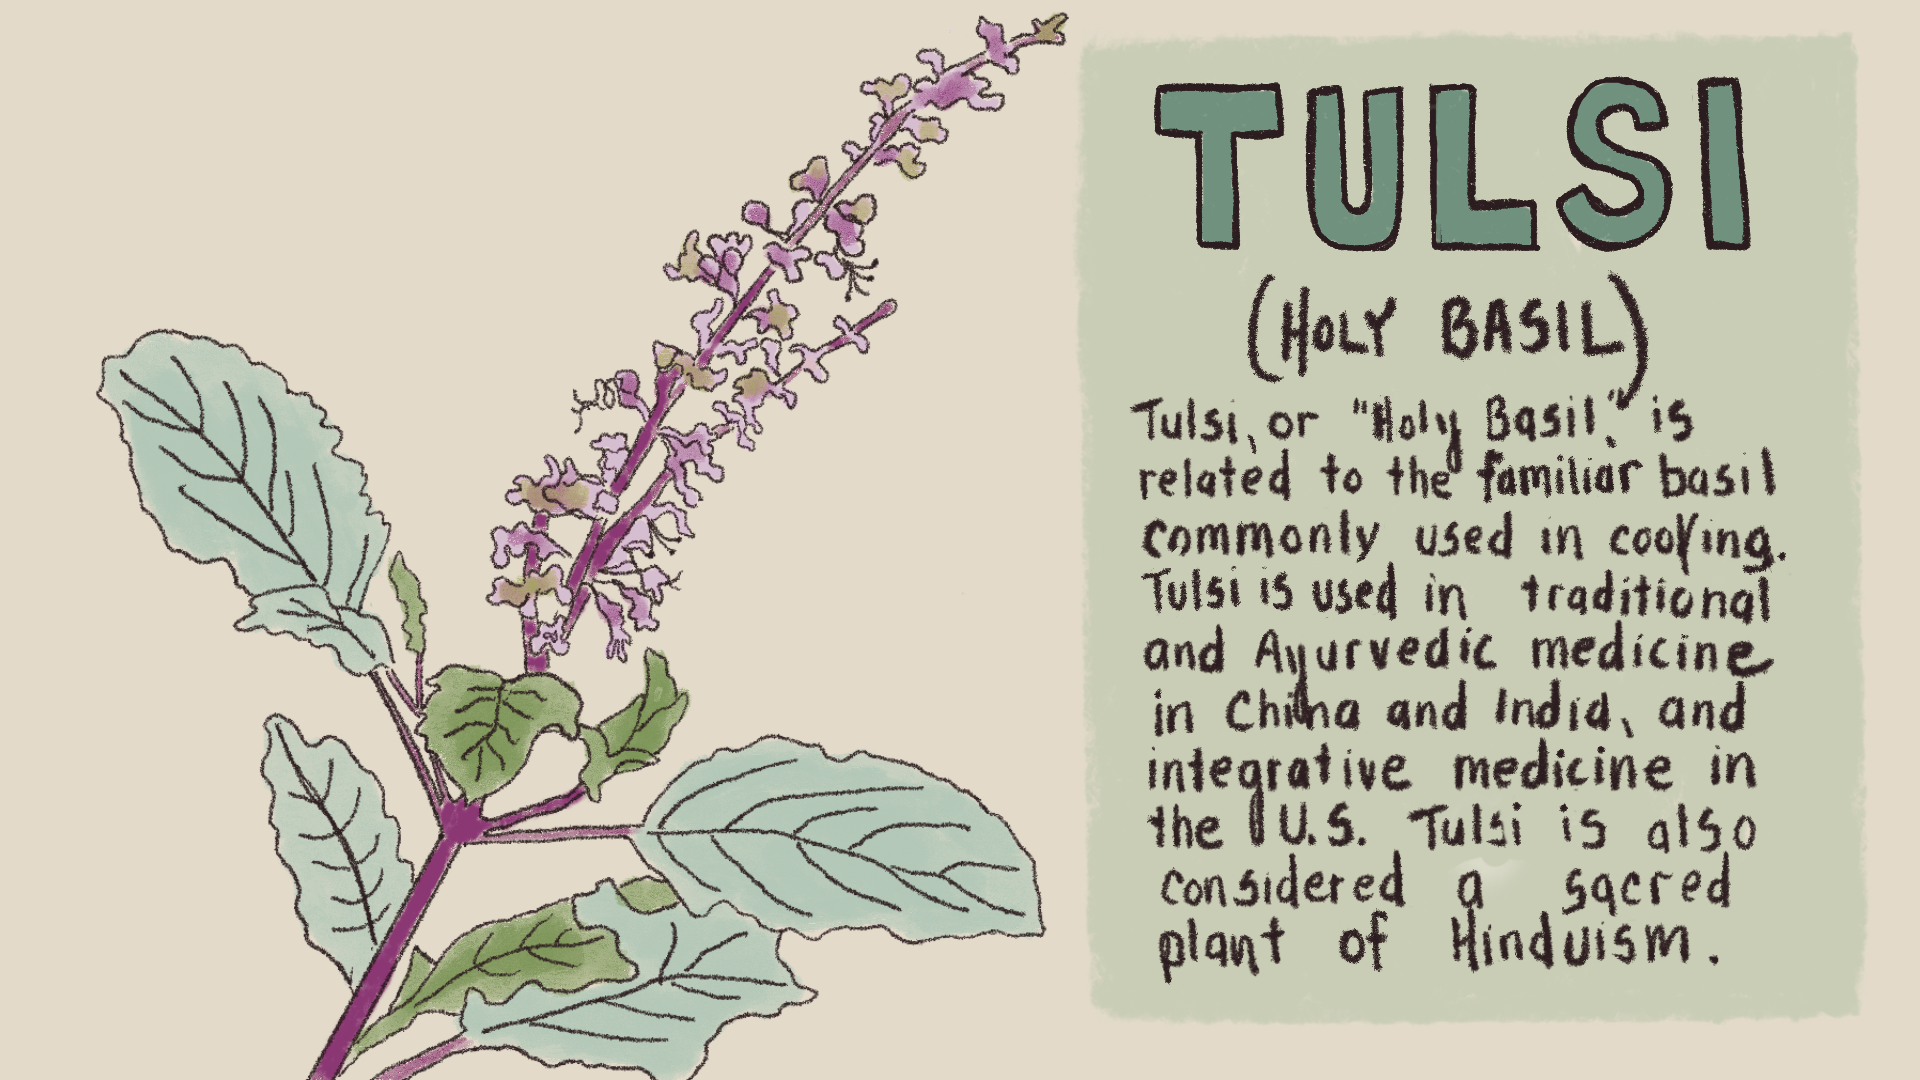 An illustration of a Tulsi plant with a label that reads: "Tulsi (Holy Basil) is related to the familiar basil commonly used in cooking. Tulsi is used in traditioanl and Ayurvedic medicine in China and India, and integrative medicine in the U.S. Tulsi is also considered a sacred plant in Hindusism.